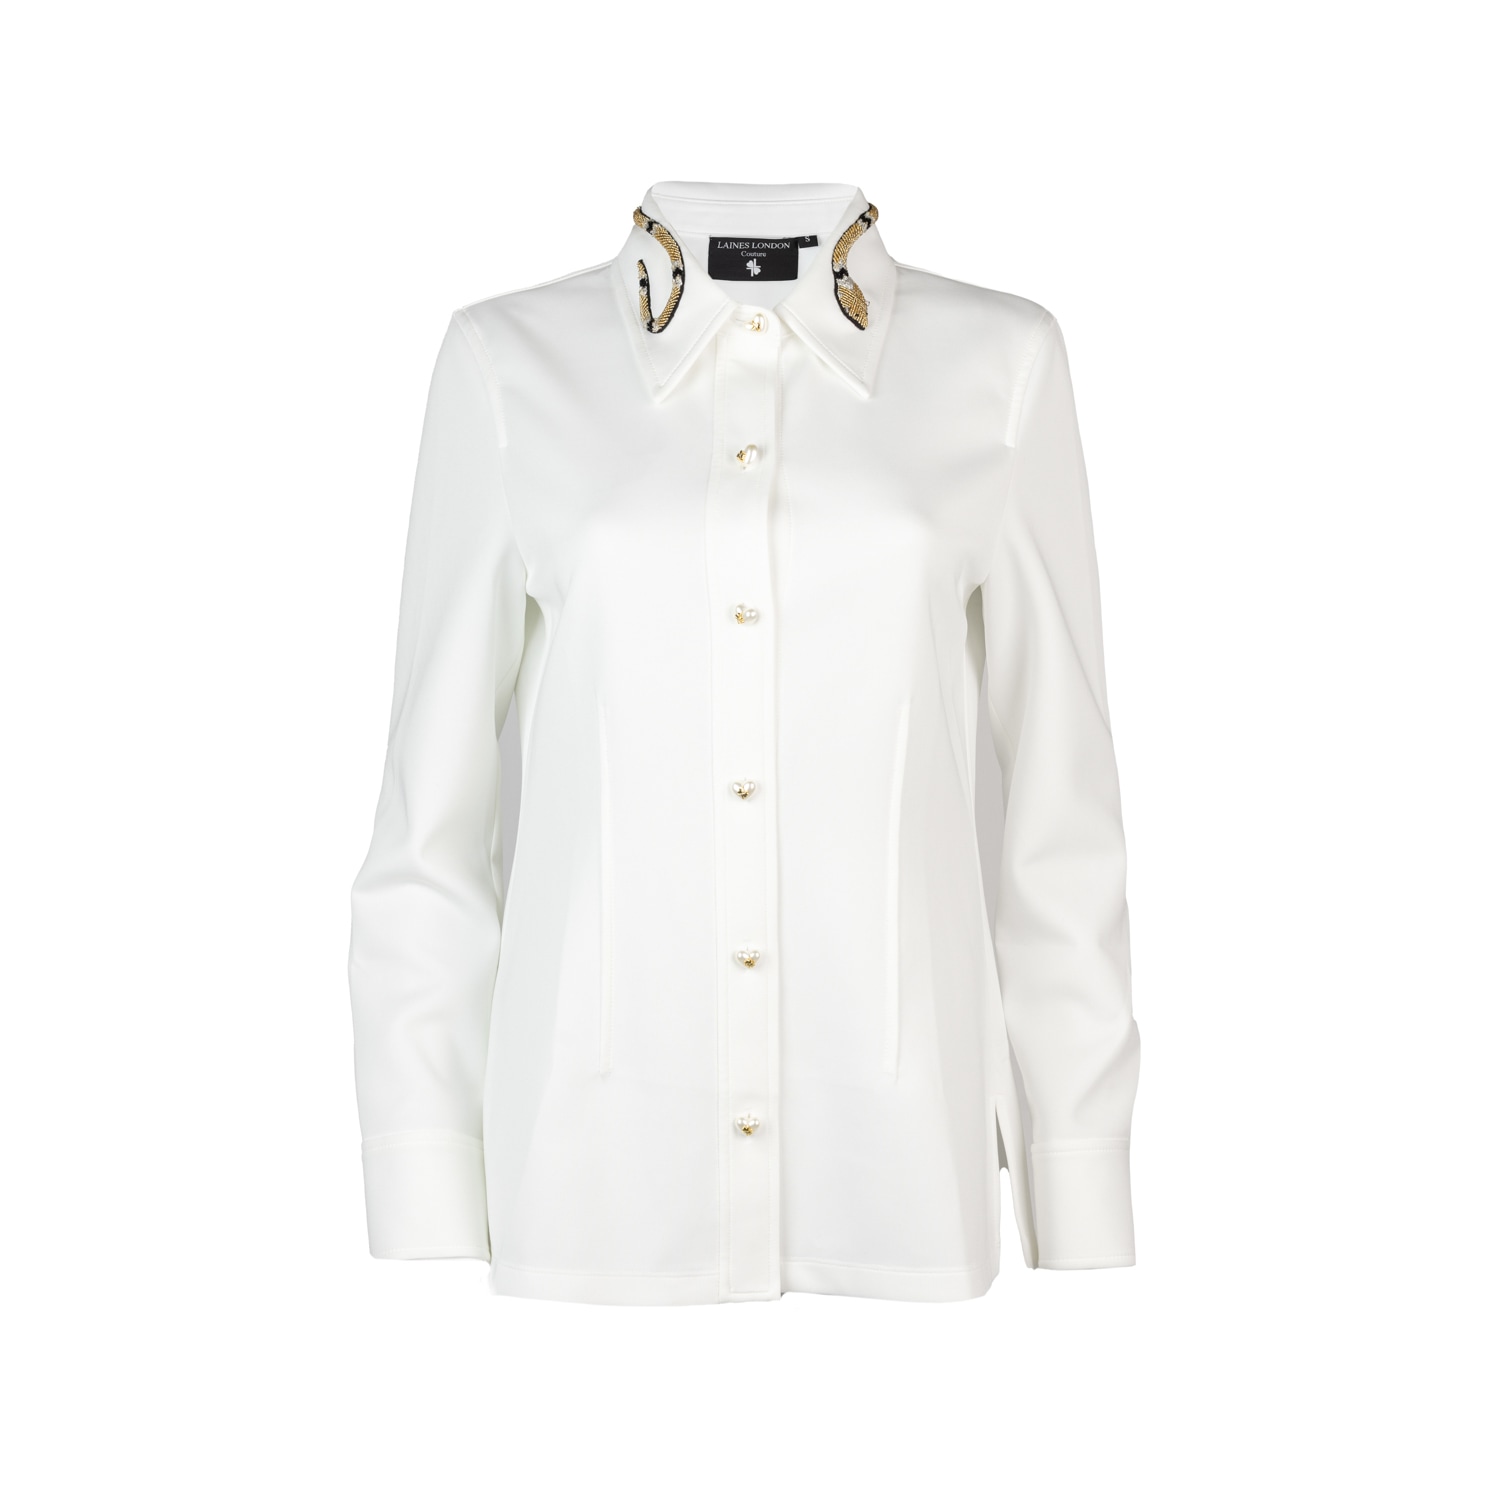 Laines London Women's Laines Couture Gold Snake Collar White Shirt